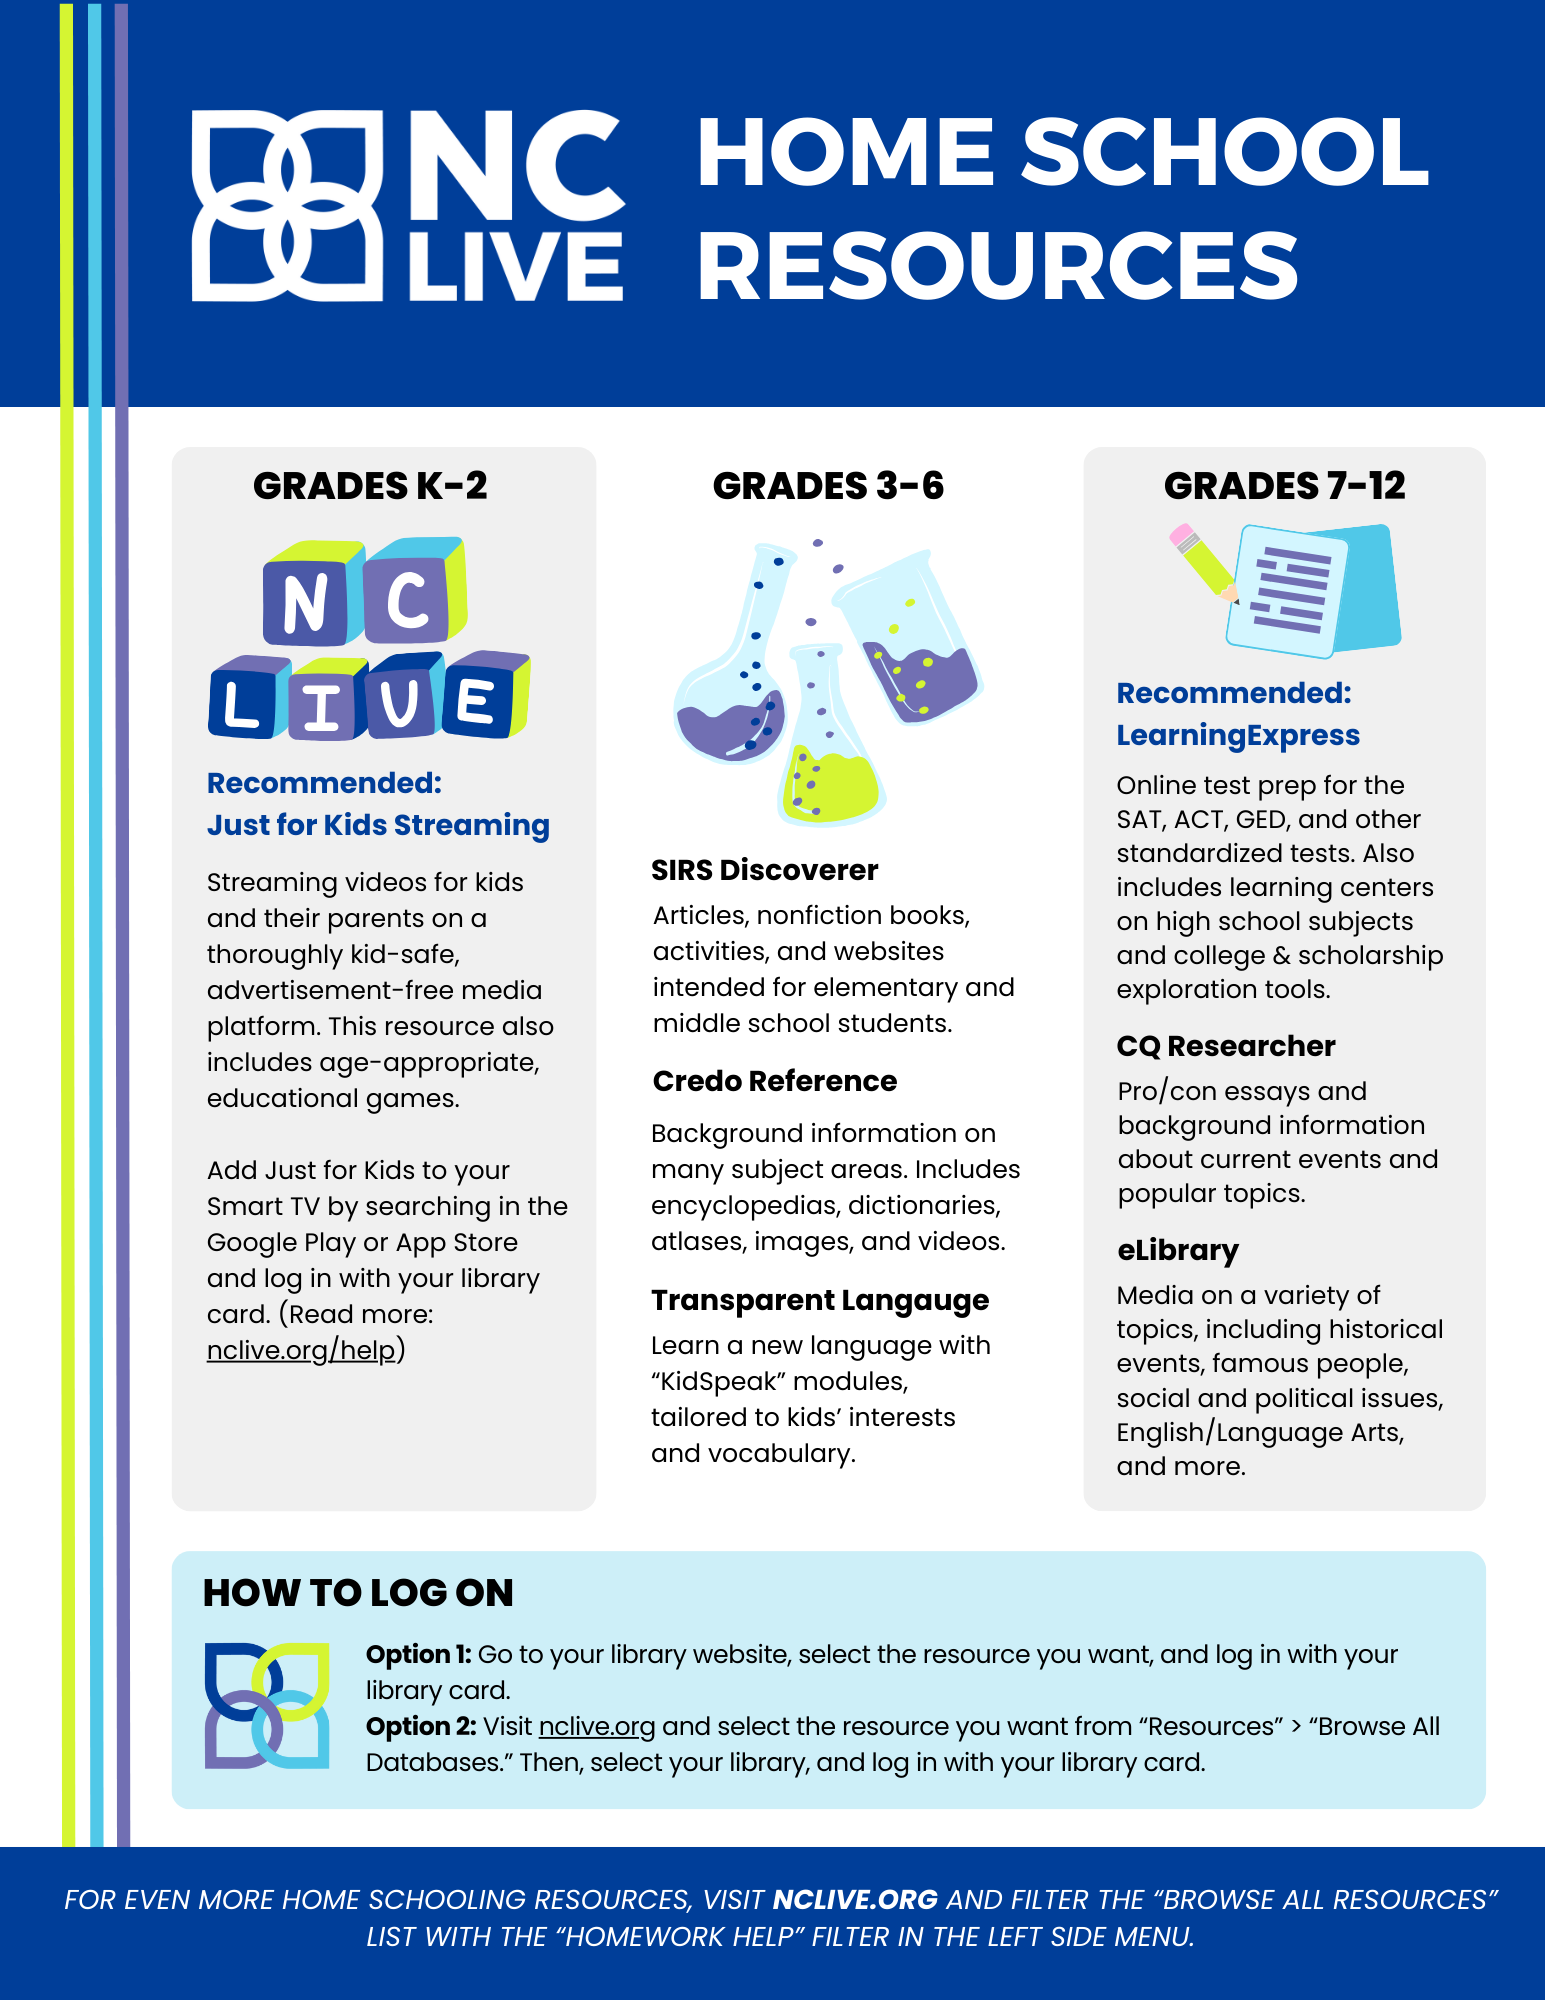 Blue and white blocks with information about resources recommended for home schooling families.